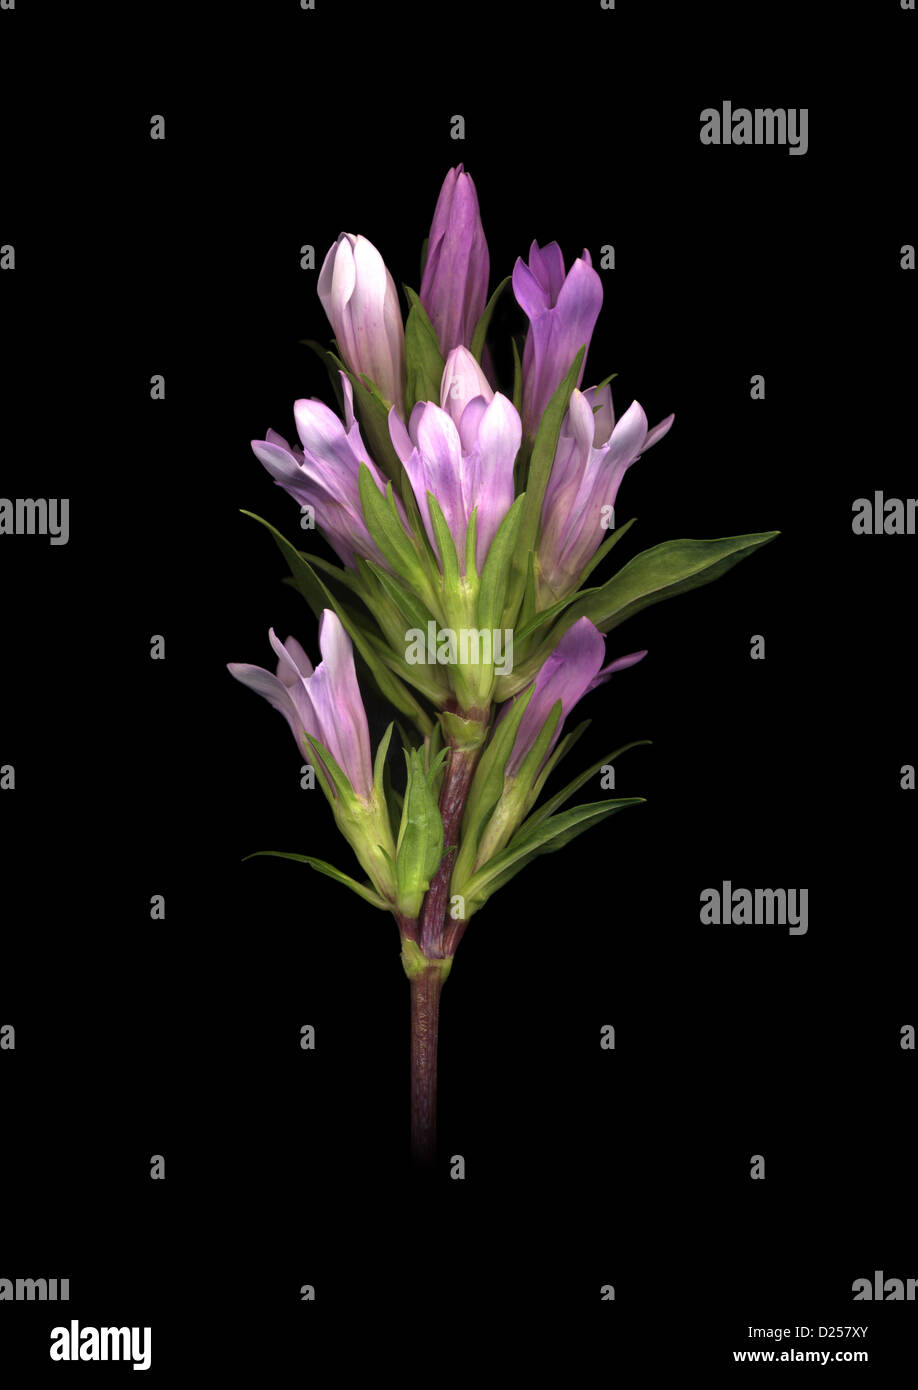 Gentian flowers on black background Stock Photo